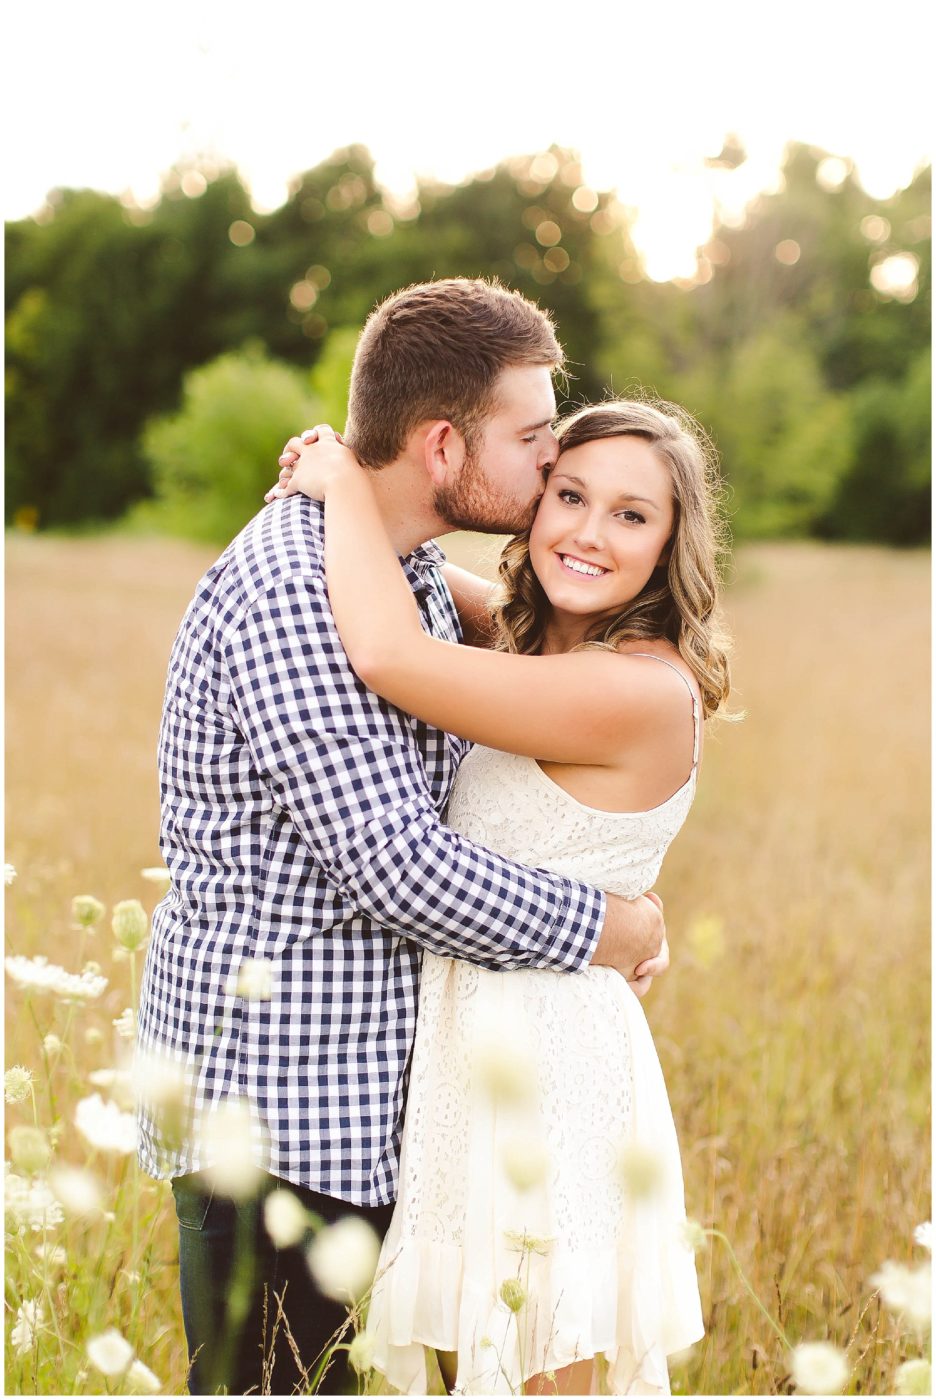 Adorable Bike Engagement Session in the Country, Fort Wayne Wedding Photography_0024